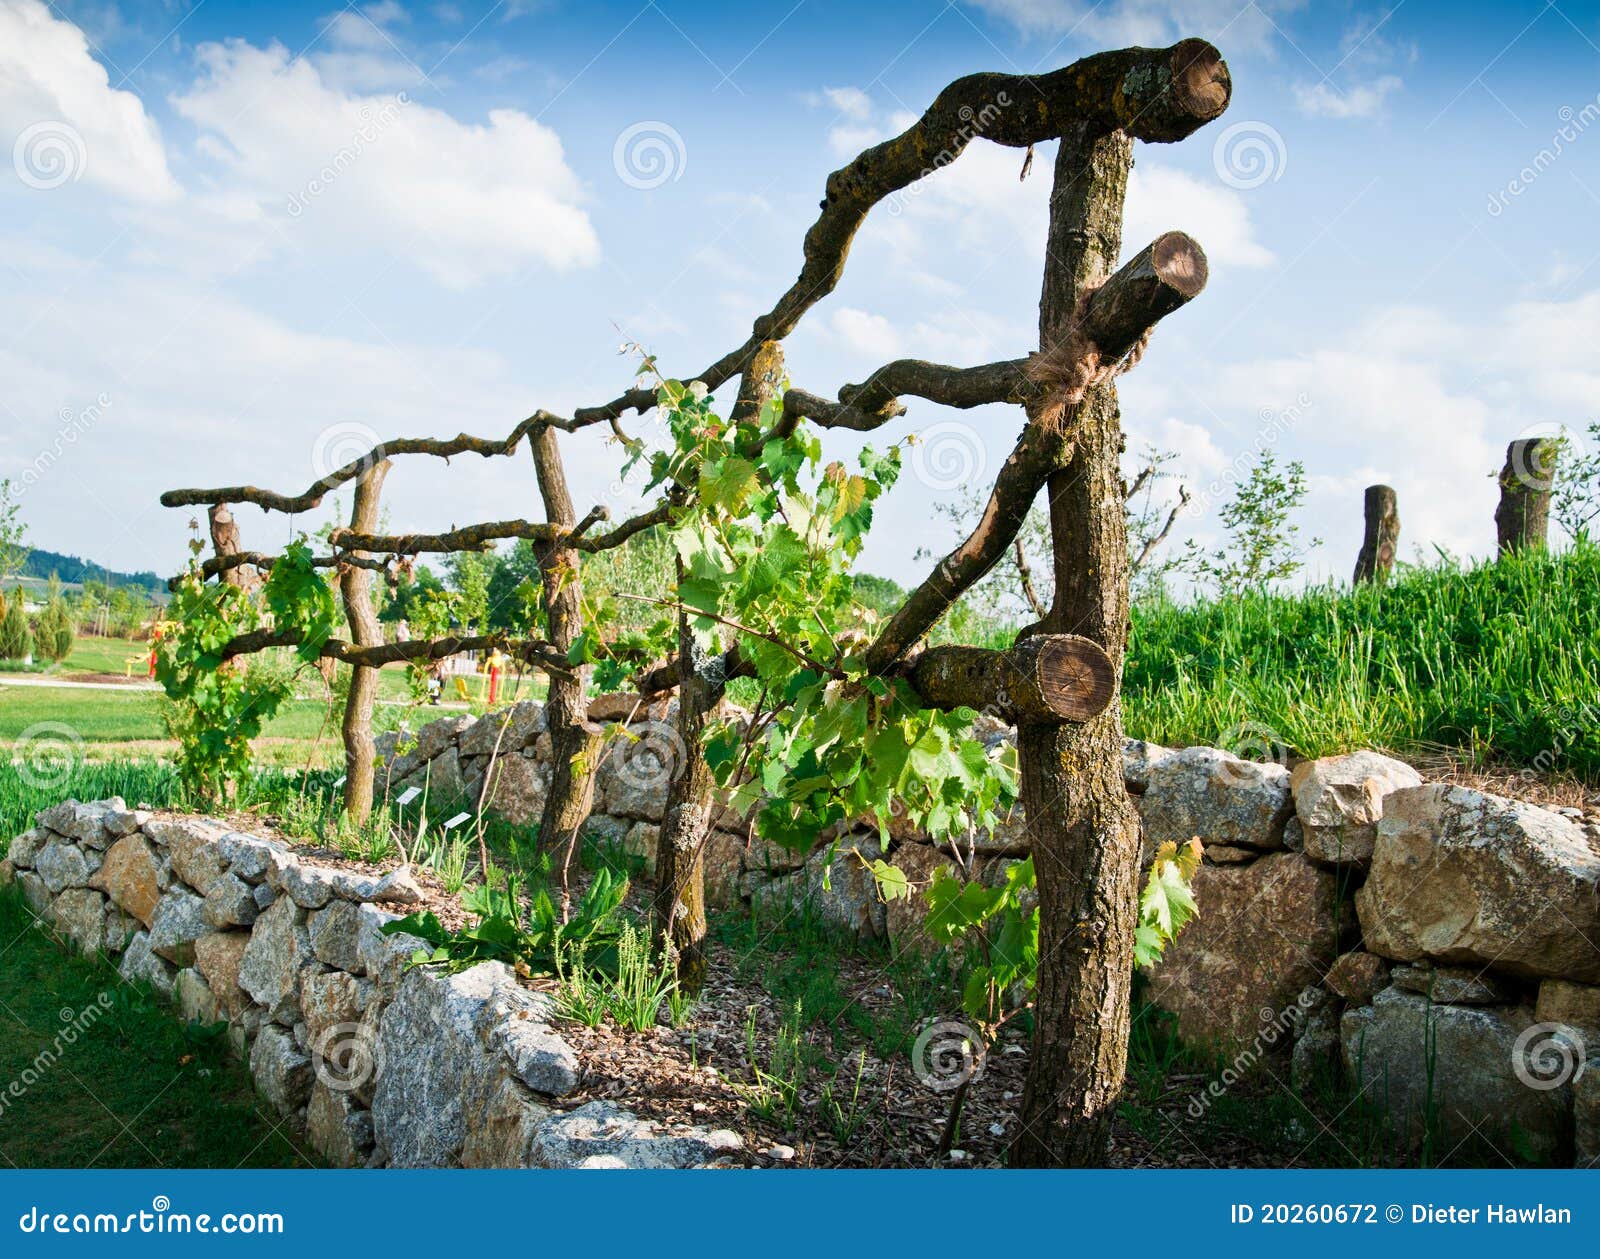 Wooden Grapevine Trellis stock photo. Image of agriculture 